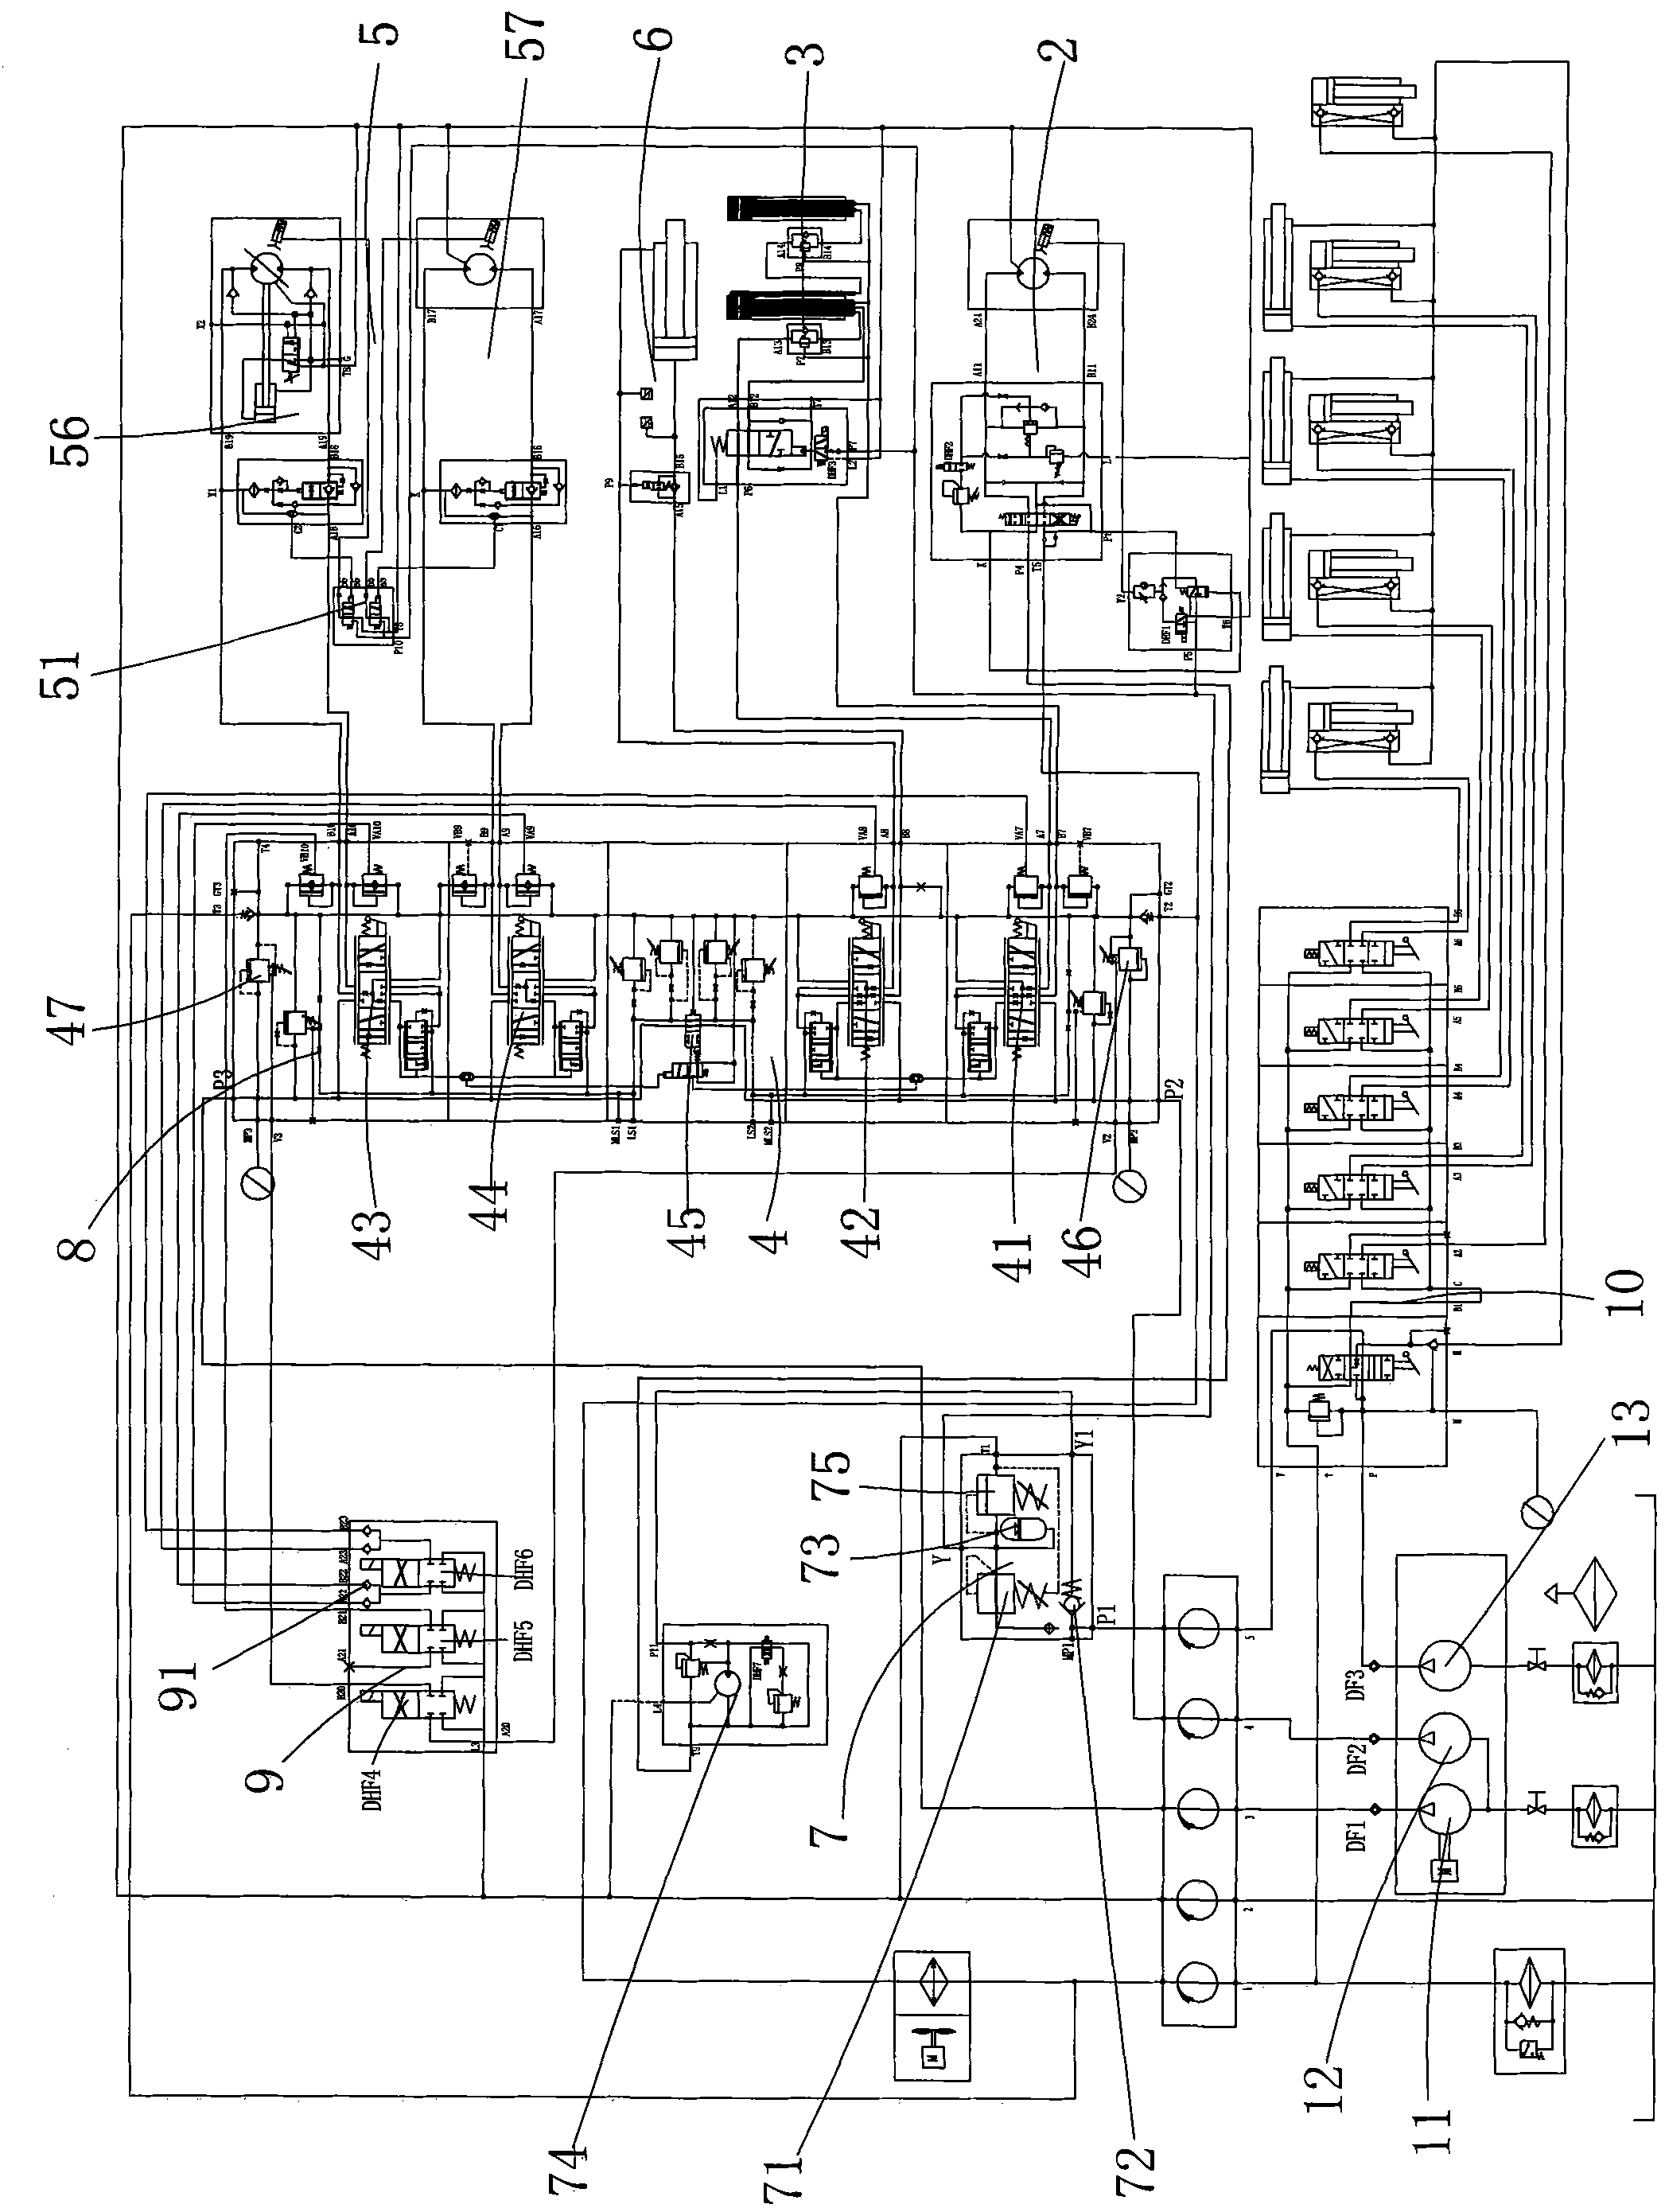 Hydraulic system of mechanically operated triple pump